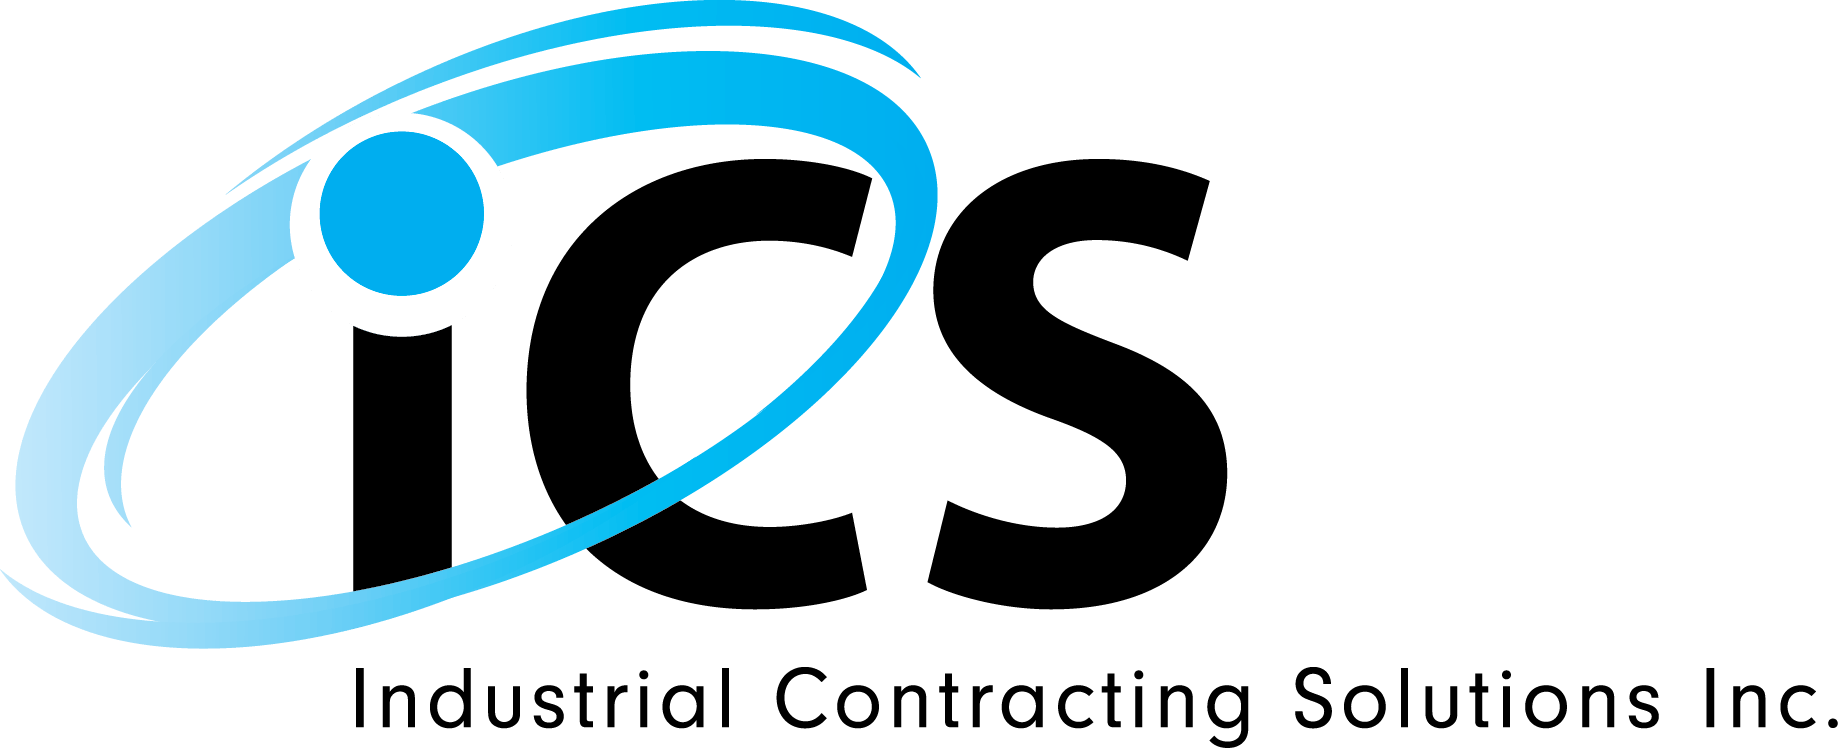 ICS Logo - Acquisition of Industrial Contracting Solutions Inc.